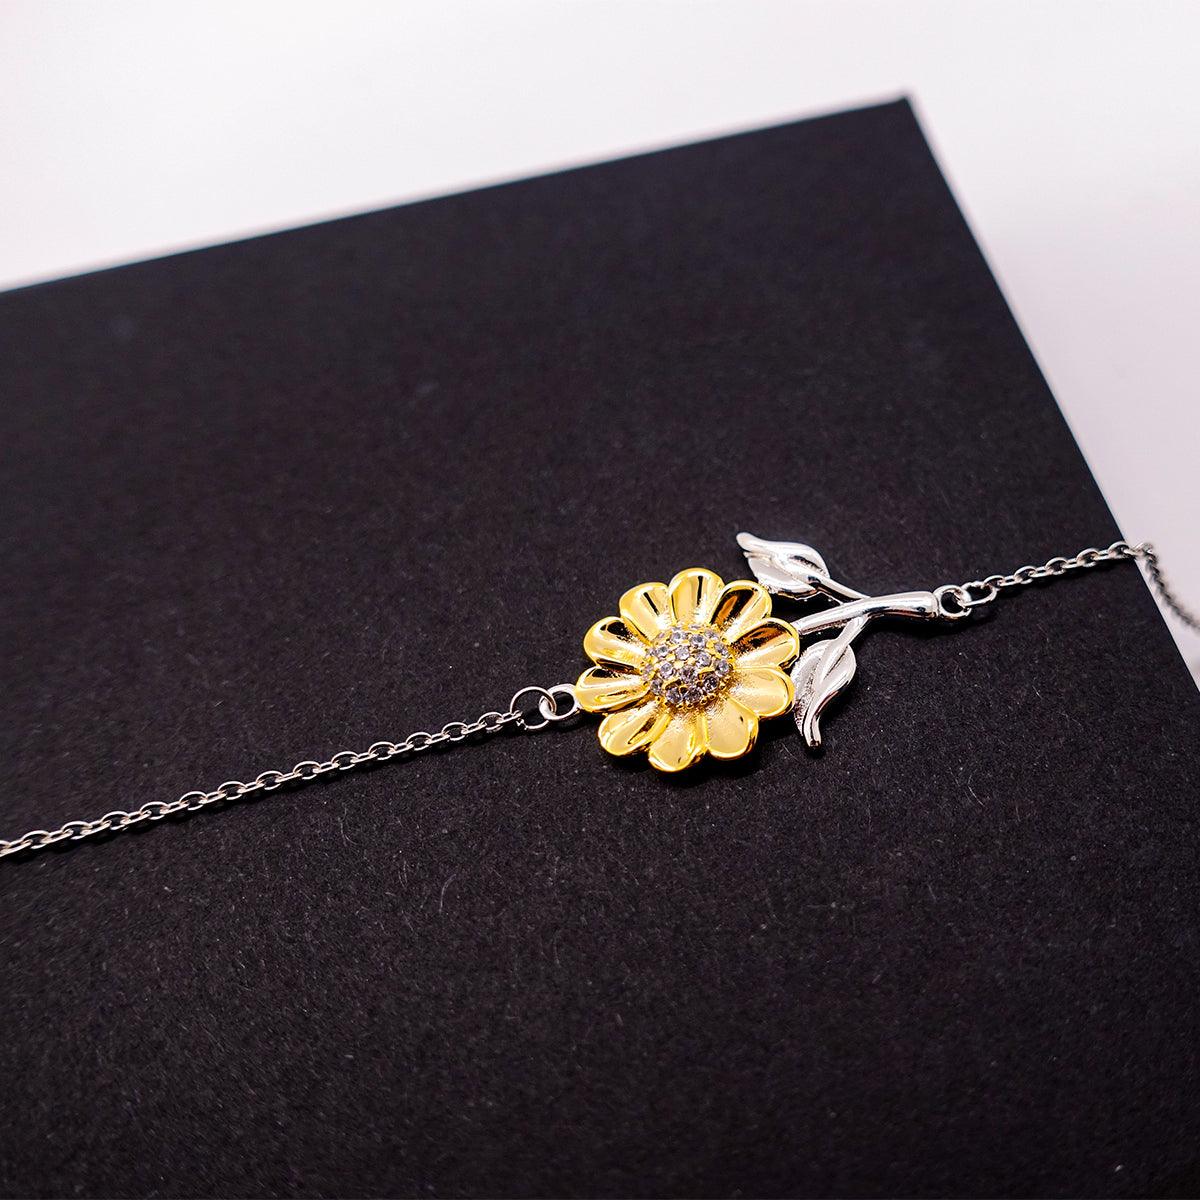 Truck DriverSunflower Bracelet - Thanks for being who you are - Birthday Christmas Jewelry Gifts Coworkers Colleague Boss - Mallard Moon Gift Shop